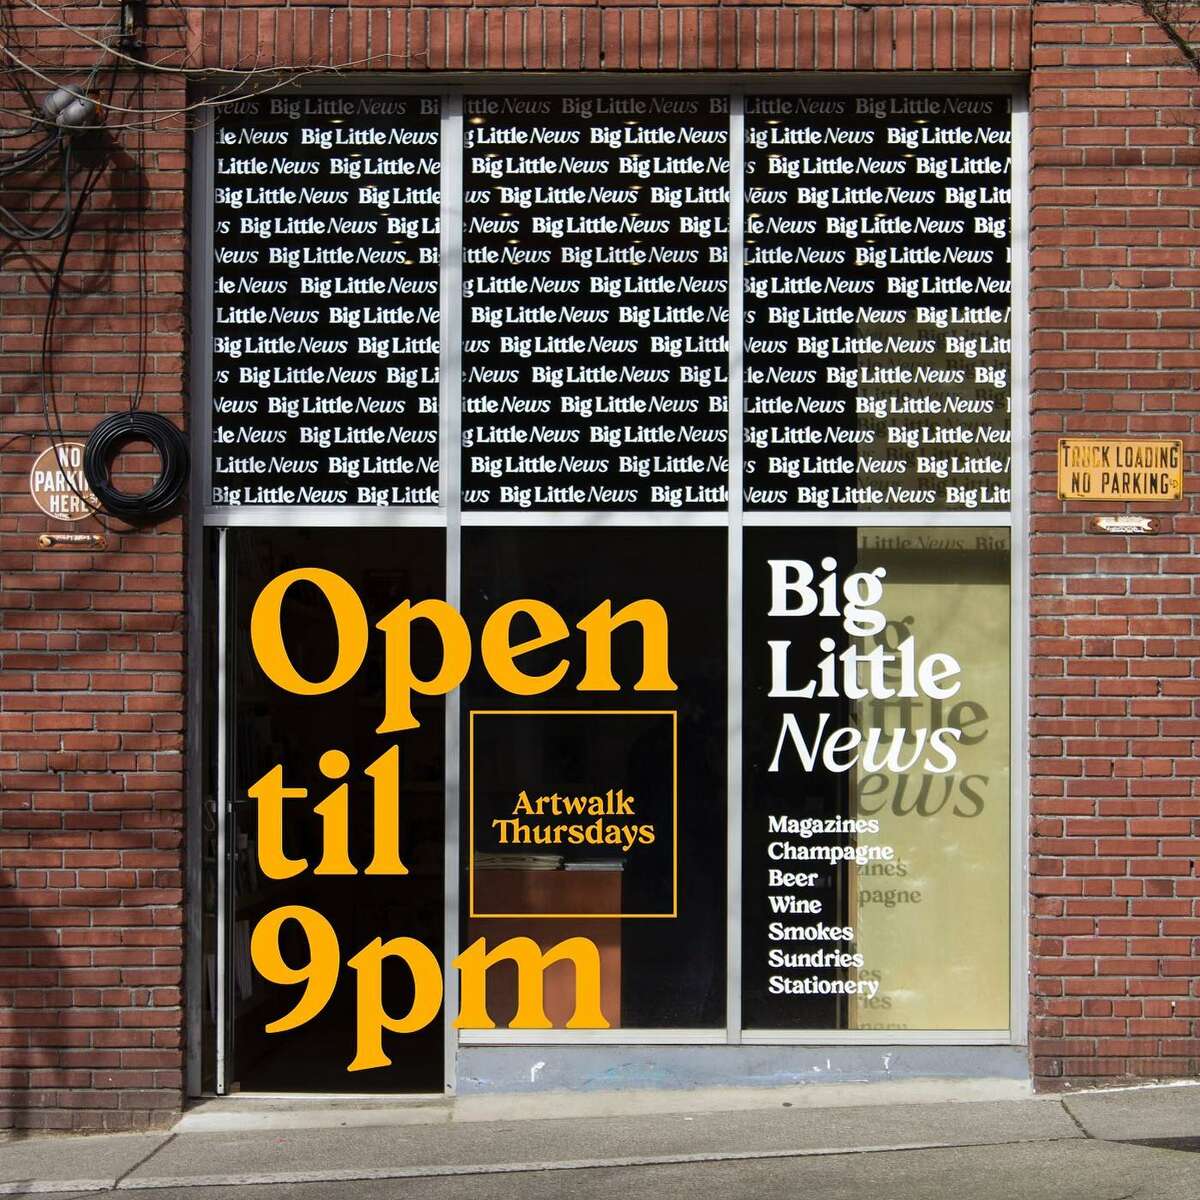 Big Little News brings 250 magazines, newspapers to the heart of Capitol Hill